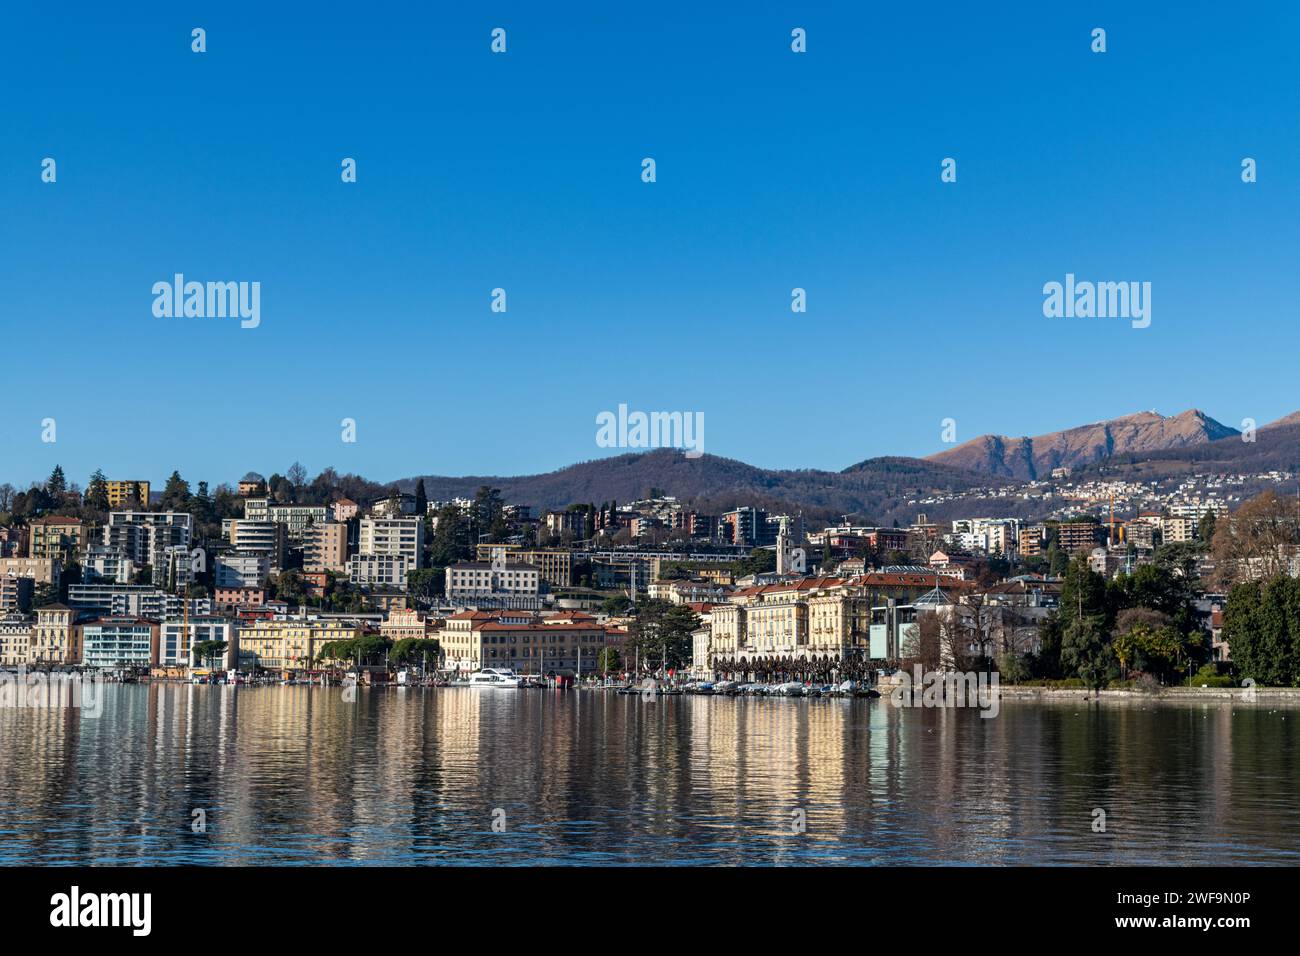 A view of buildings reflected in the water of Lake Lugano in Switzerland Stock Photo